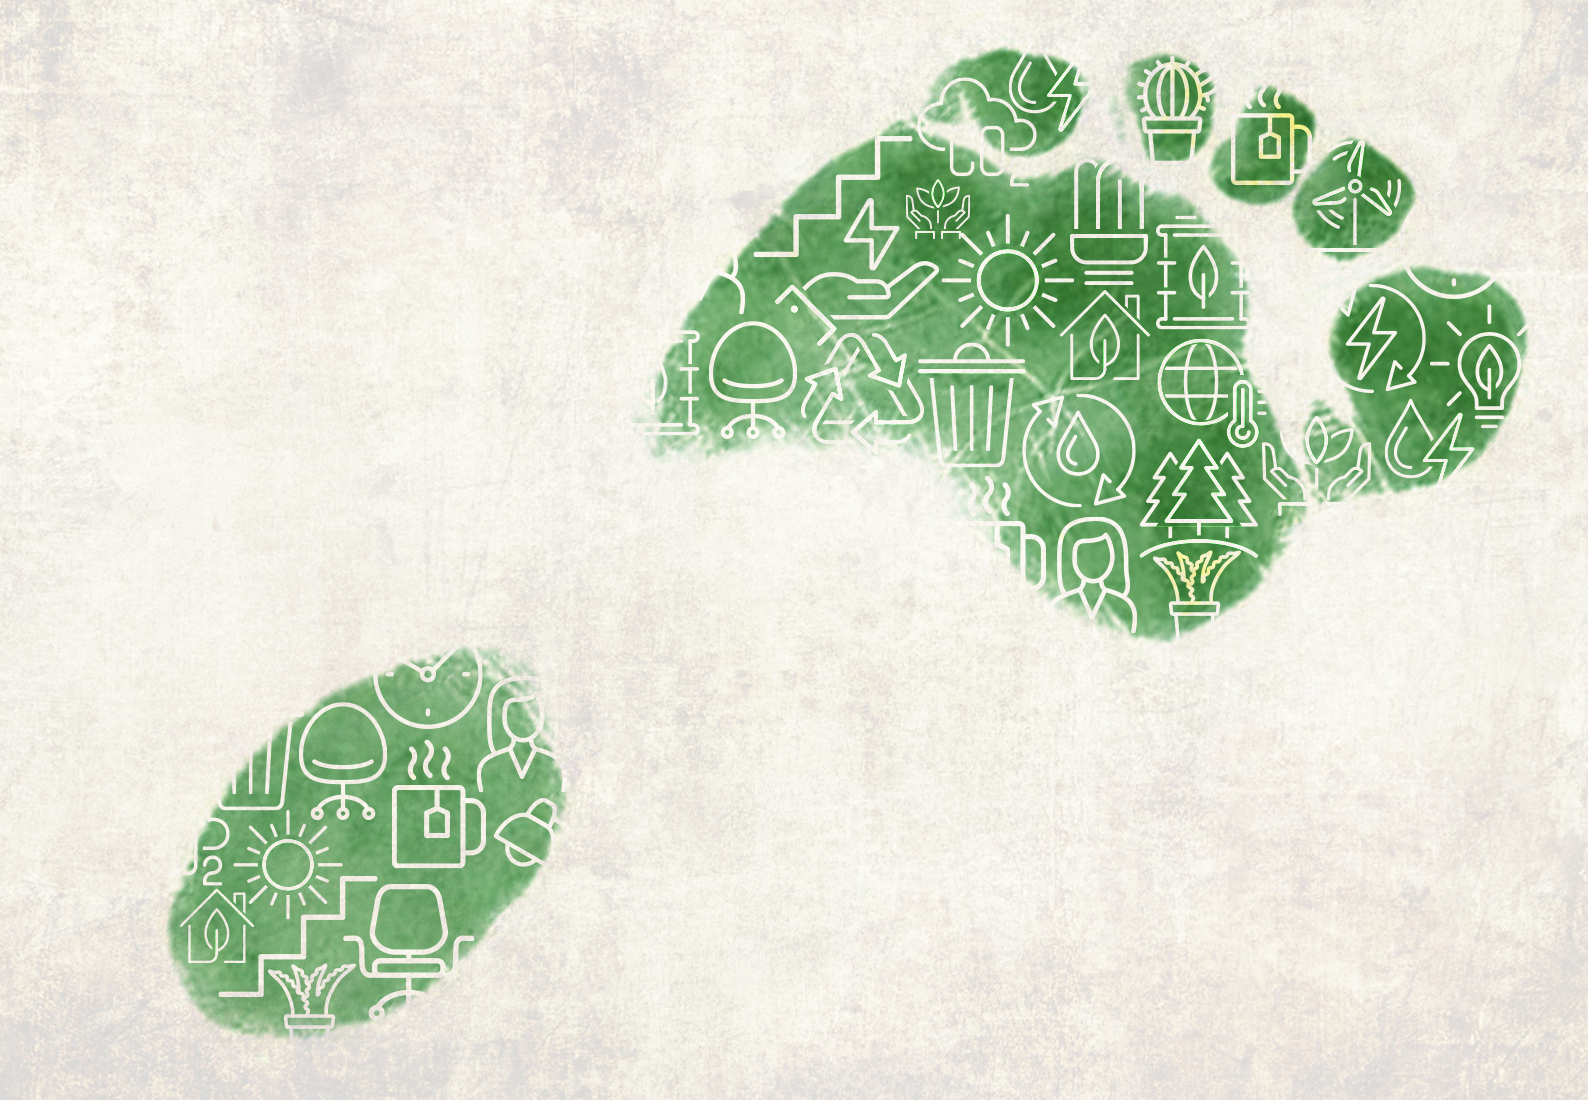 A green footprint is depicted, representing an office that prioritizes environmental sustainability.